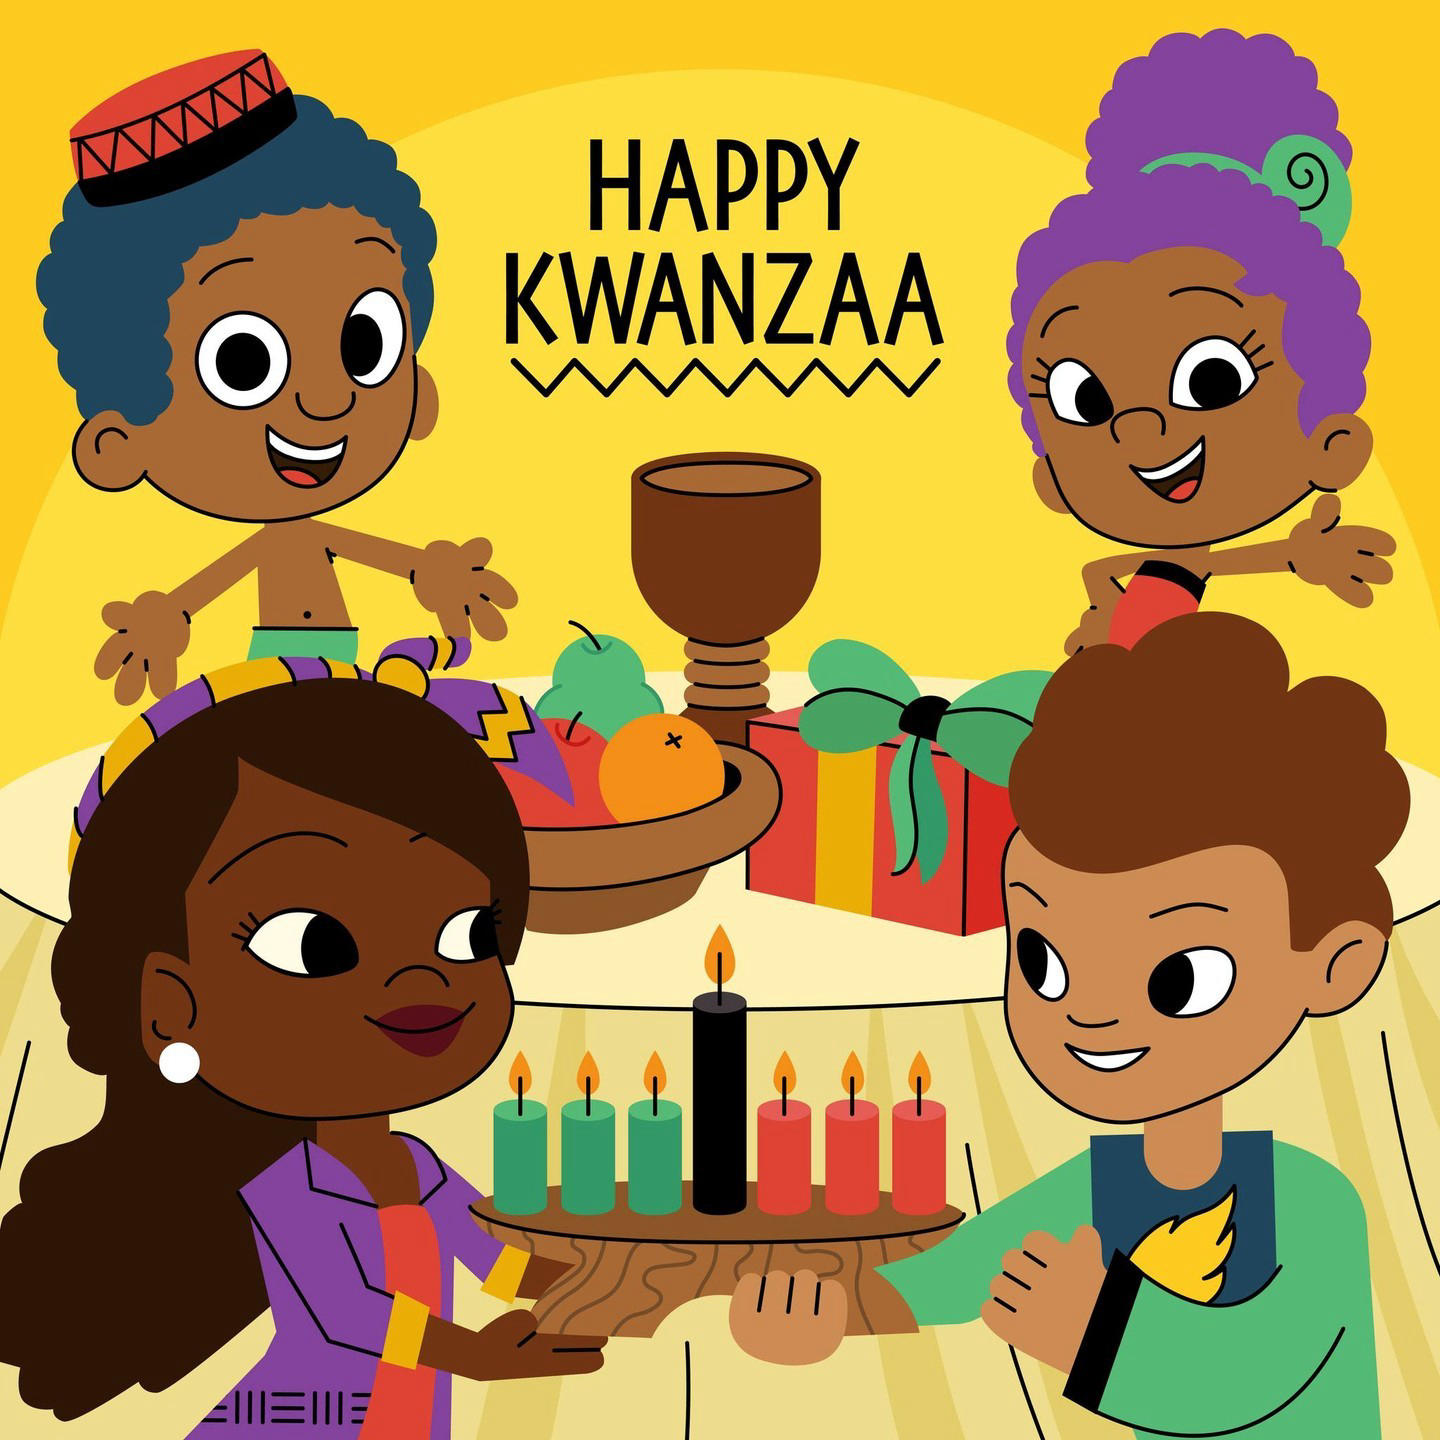 Nick Jr. - Celebrating the first day of Kwanzaa with our Nick Jr